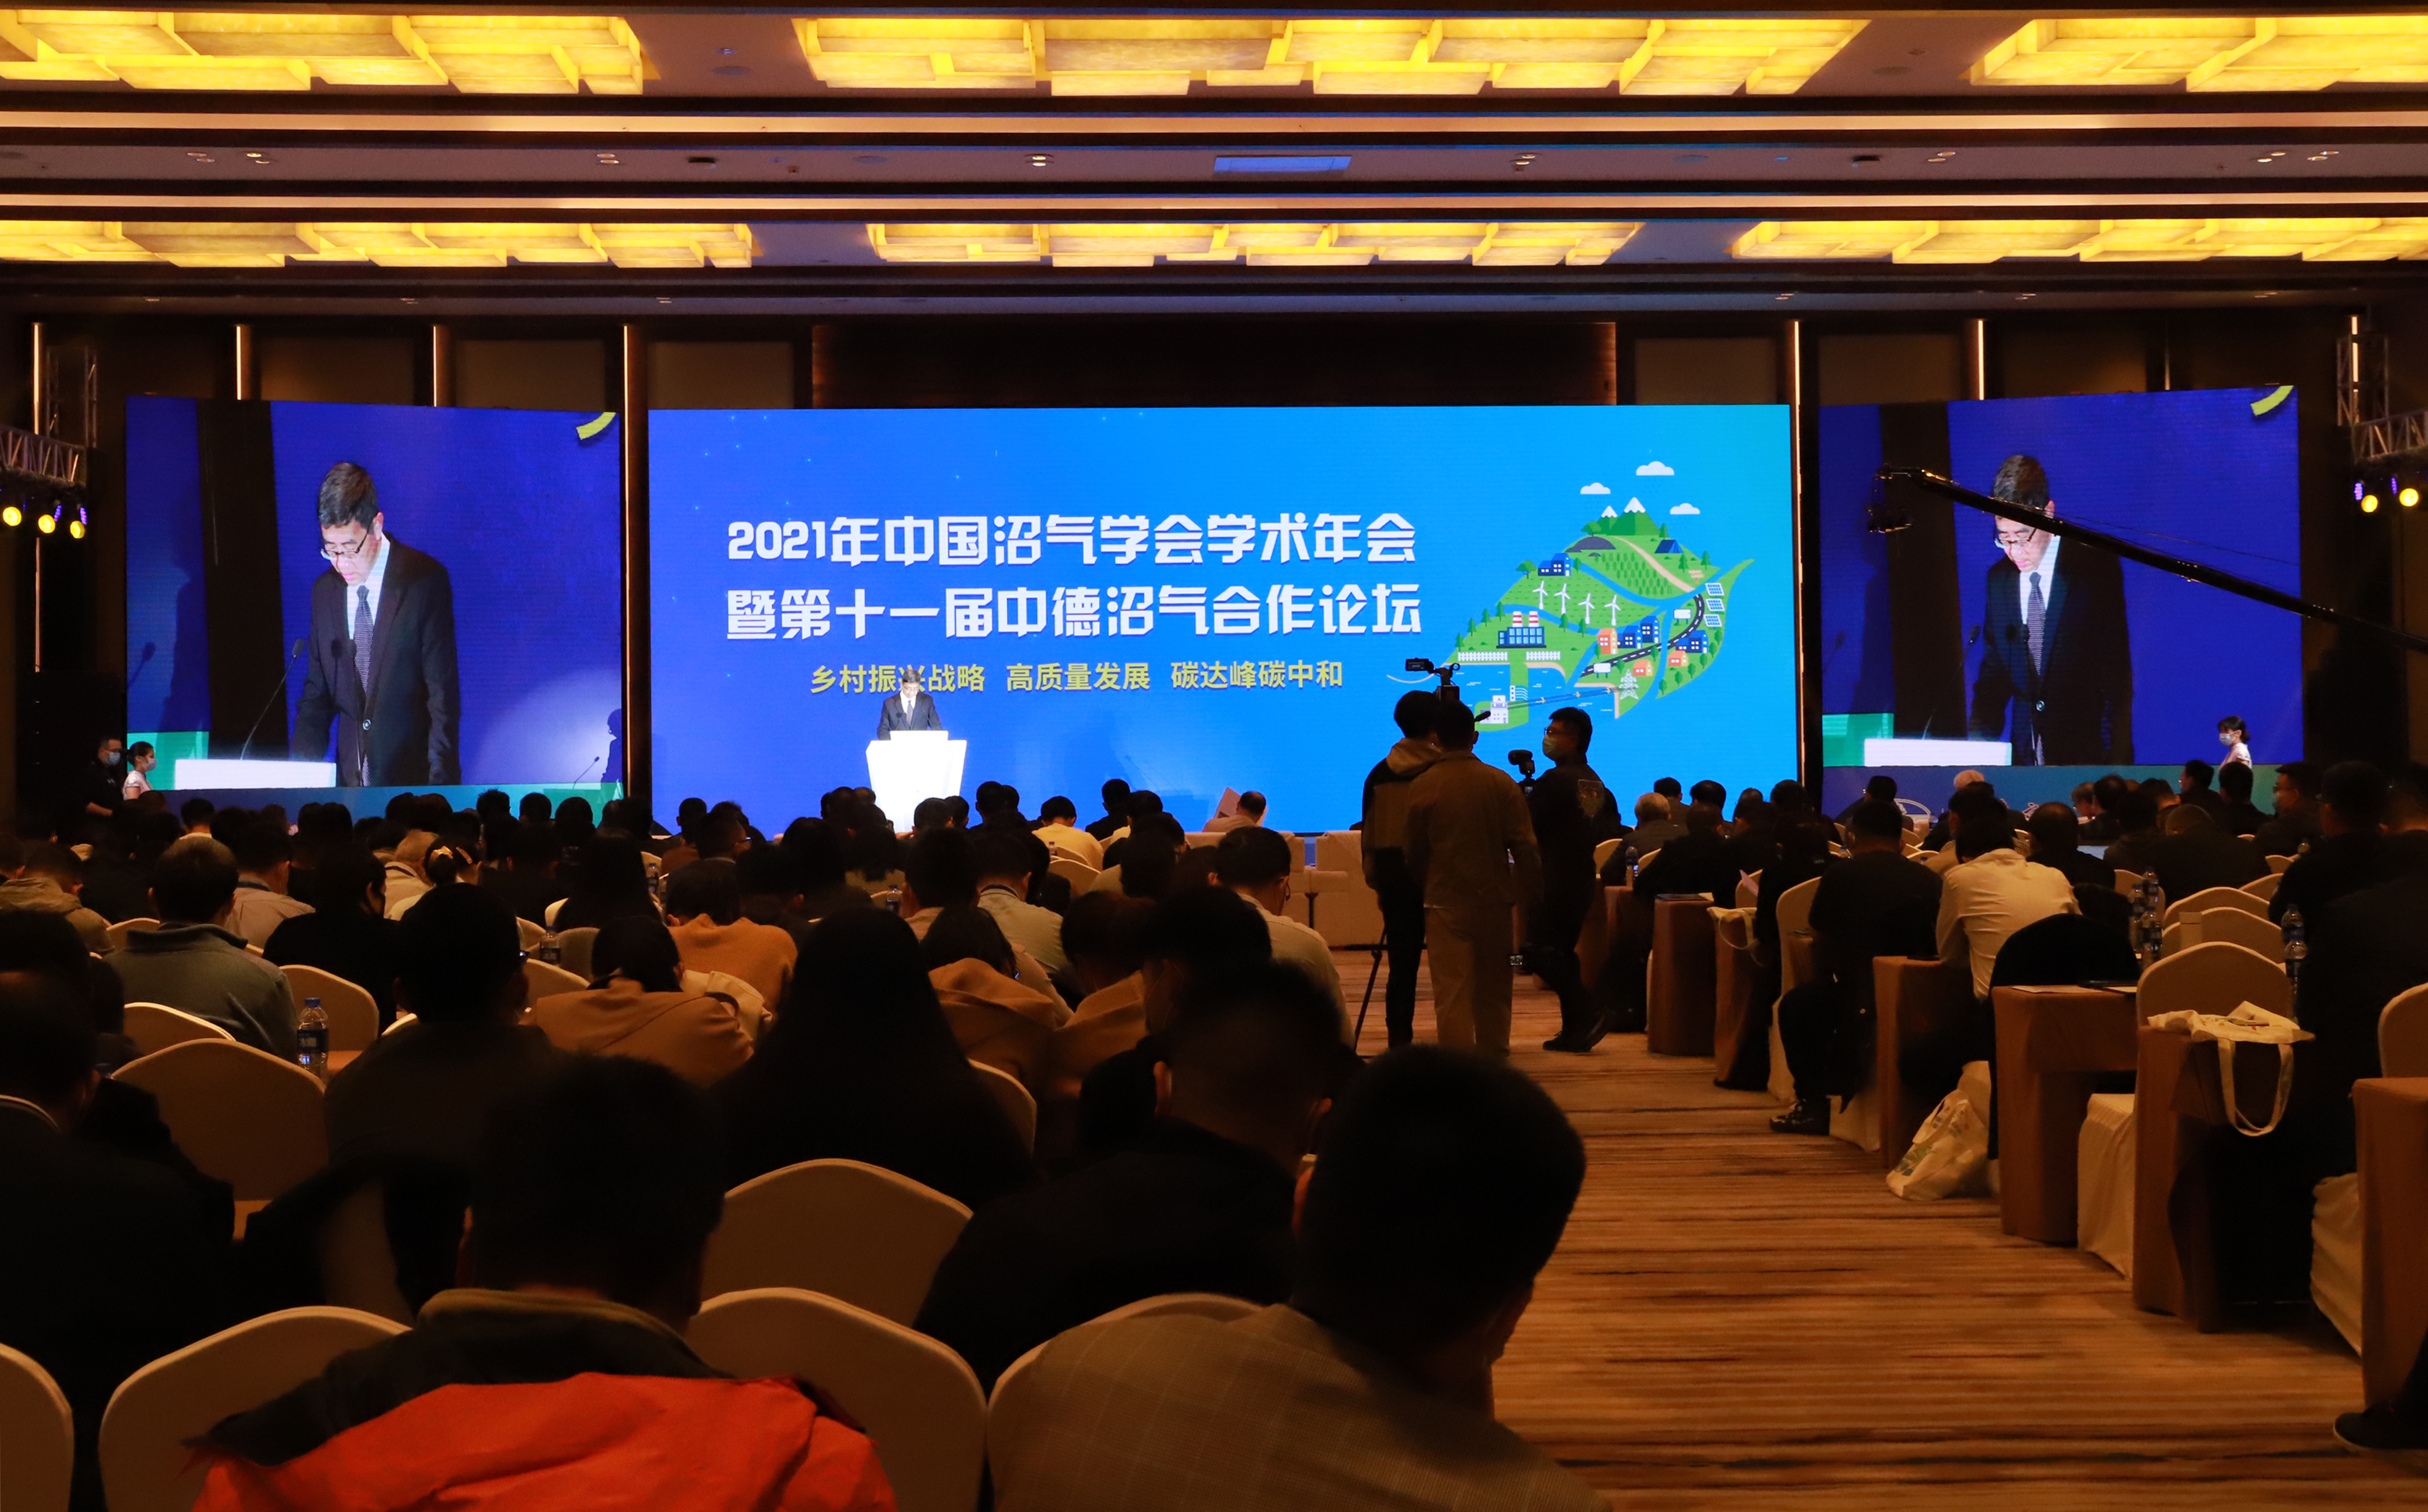 YHR attended the 2021 Chinese Biogas Association Annual Conference and Sino-German Biogas Cooperation Forum